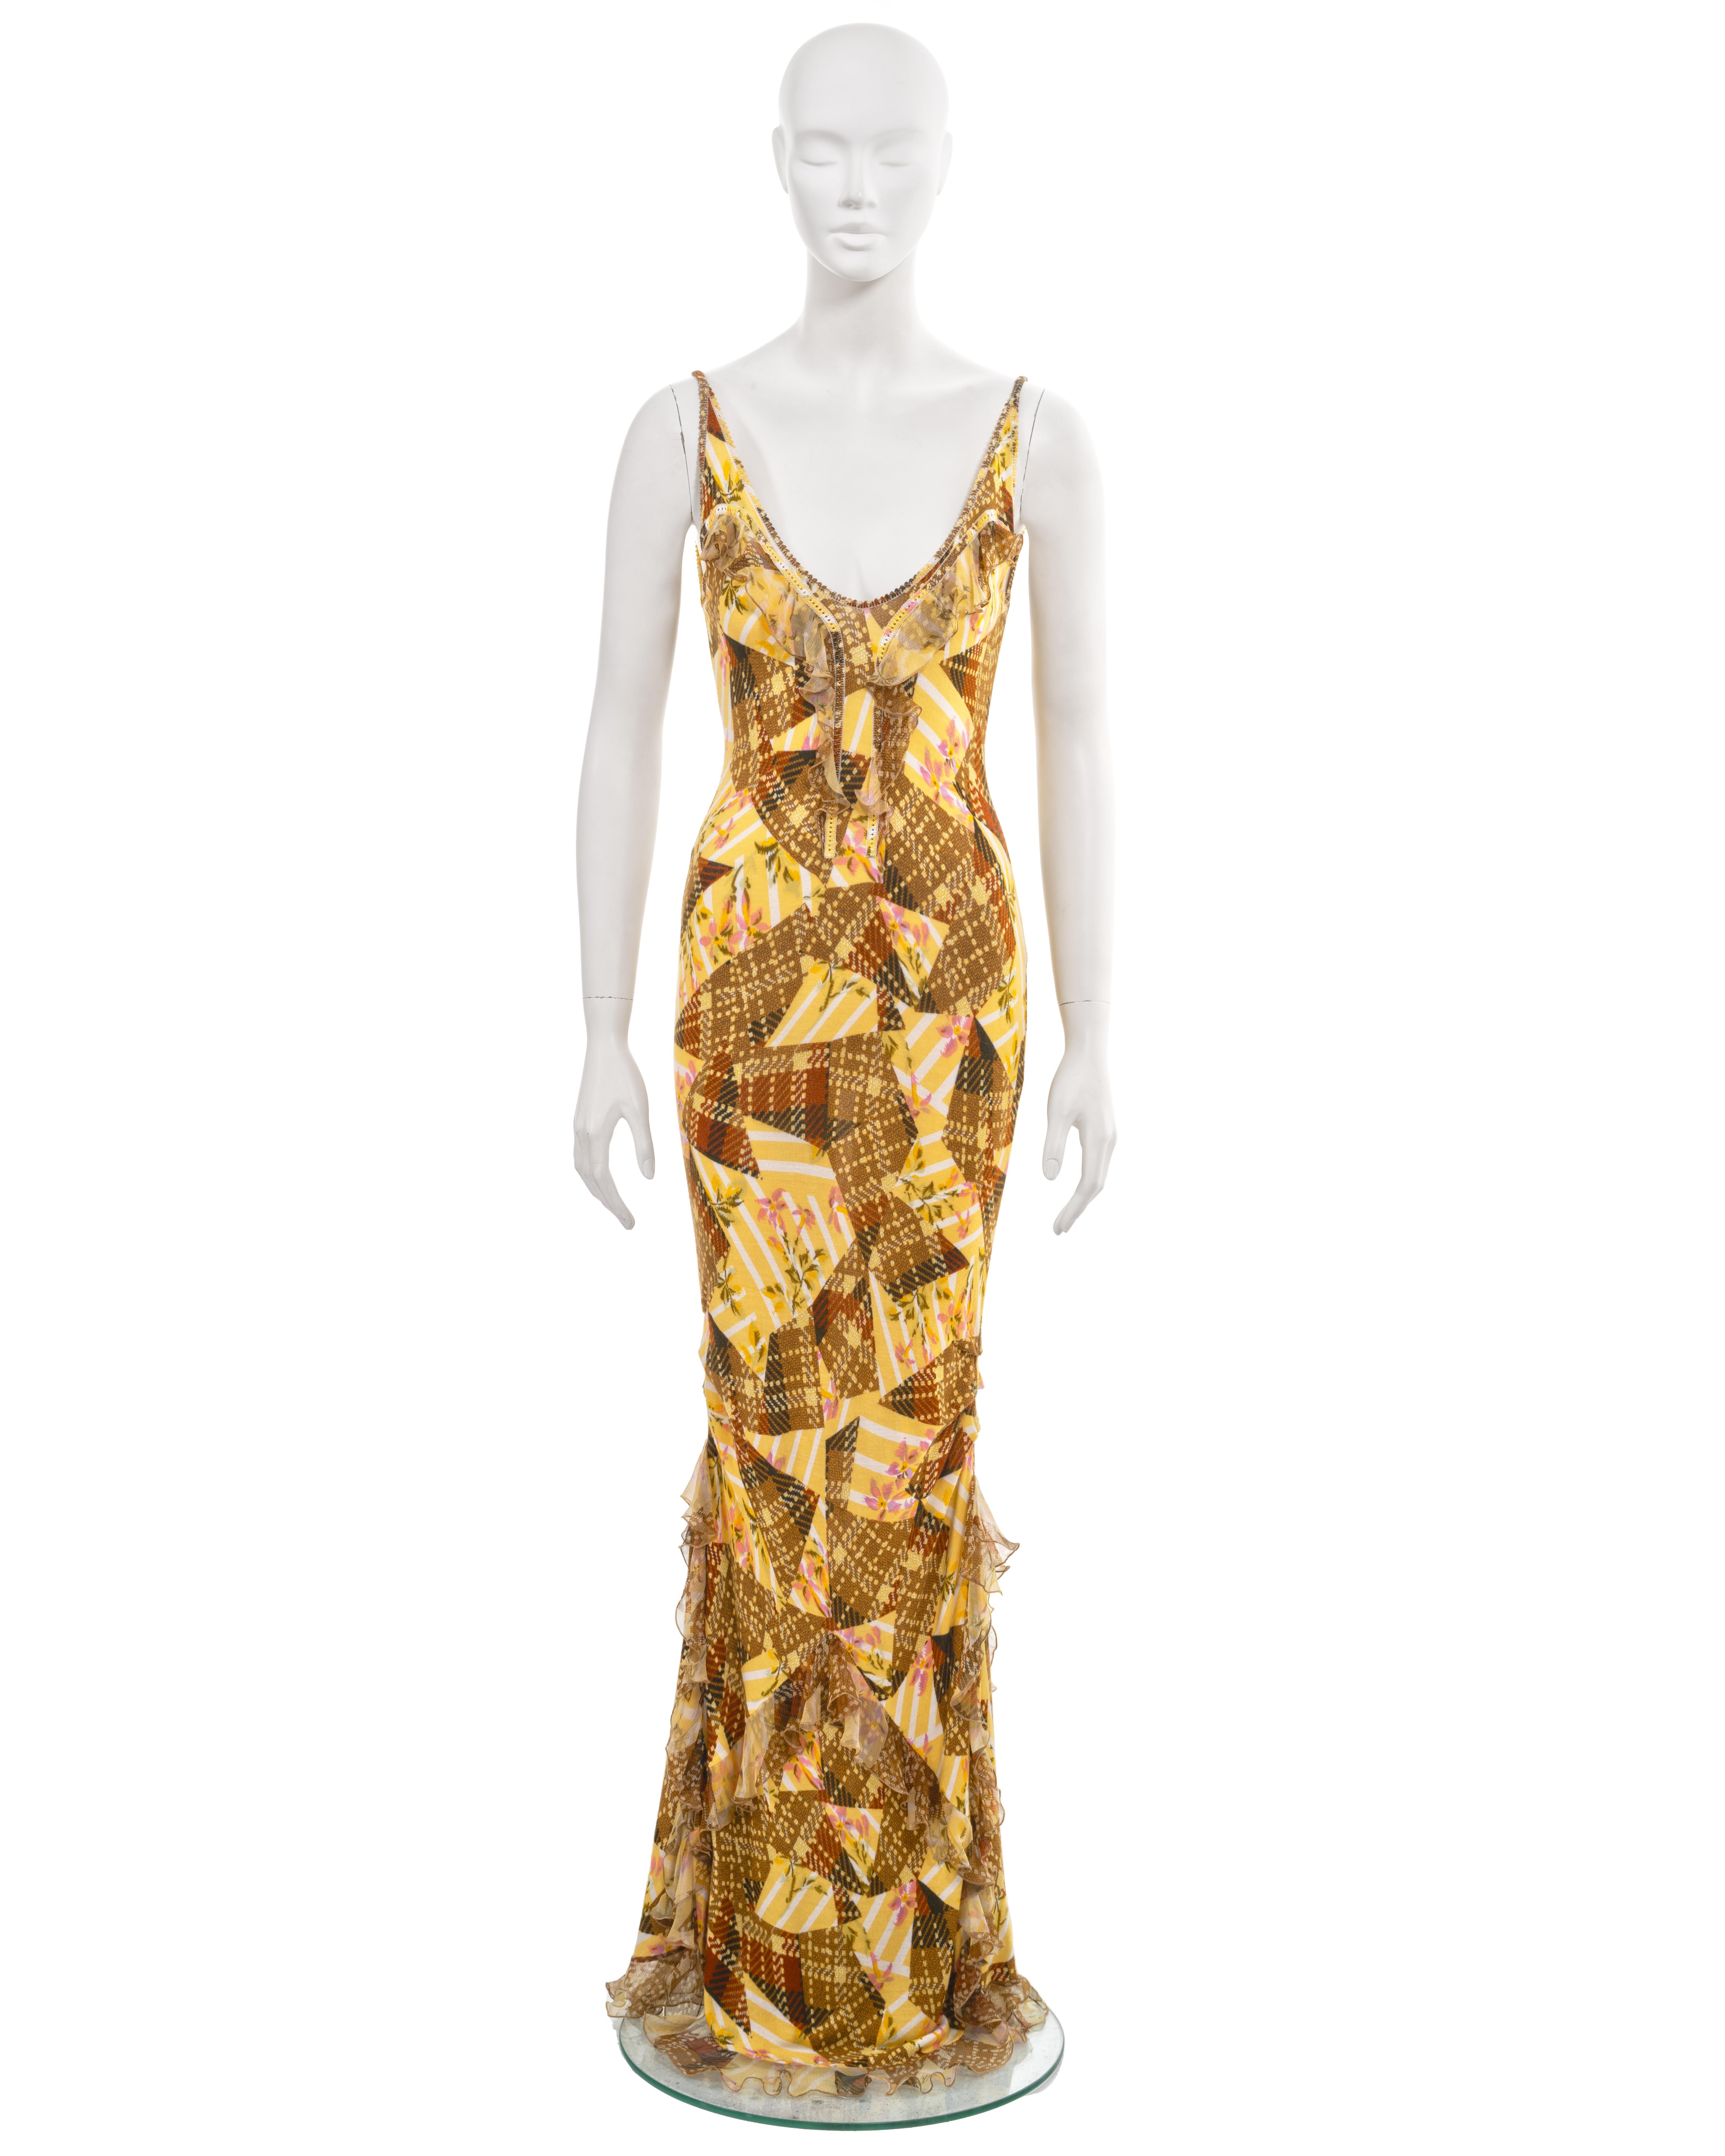 ▪ John Galliano knitted maxi dress
▪ Fall-Winter 2004
▪Expertly crafted from knit cotton jersey, showcasing an allover woven patchwork print featuring tartan and floral squares in delightful shades of yellow, brown, and pinks.
▪ Embellished with